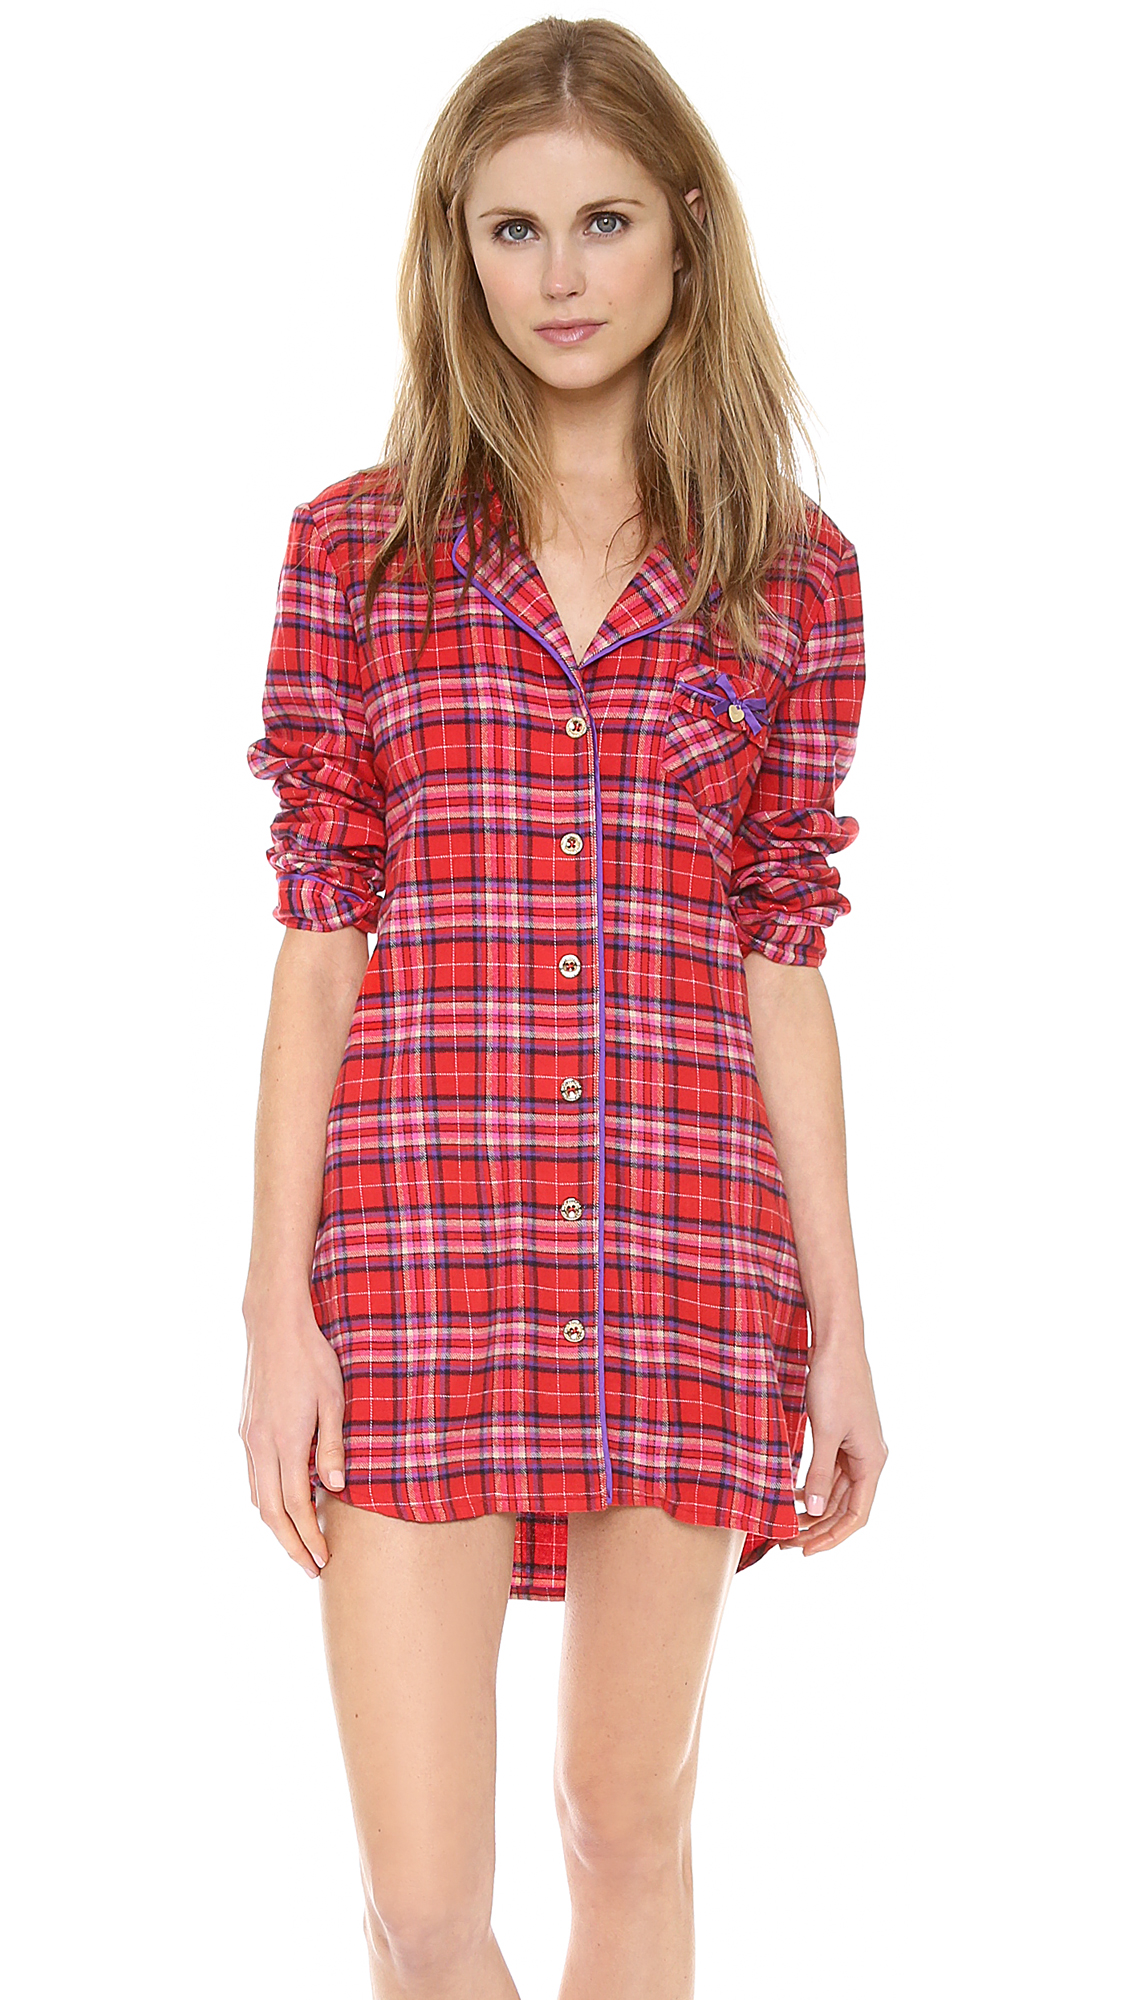 Lyst - Juicy Couture Flannel Nightshirt in Red